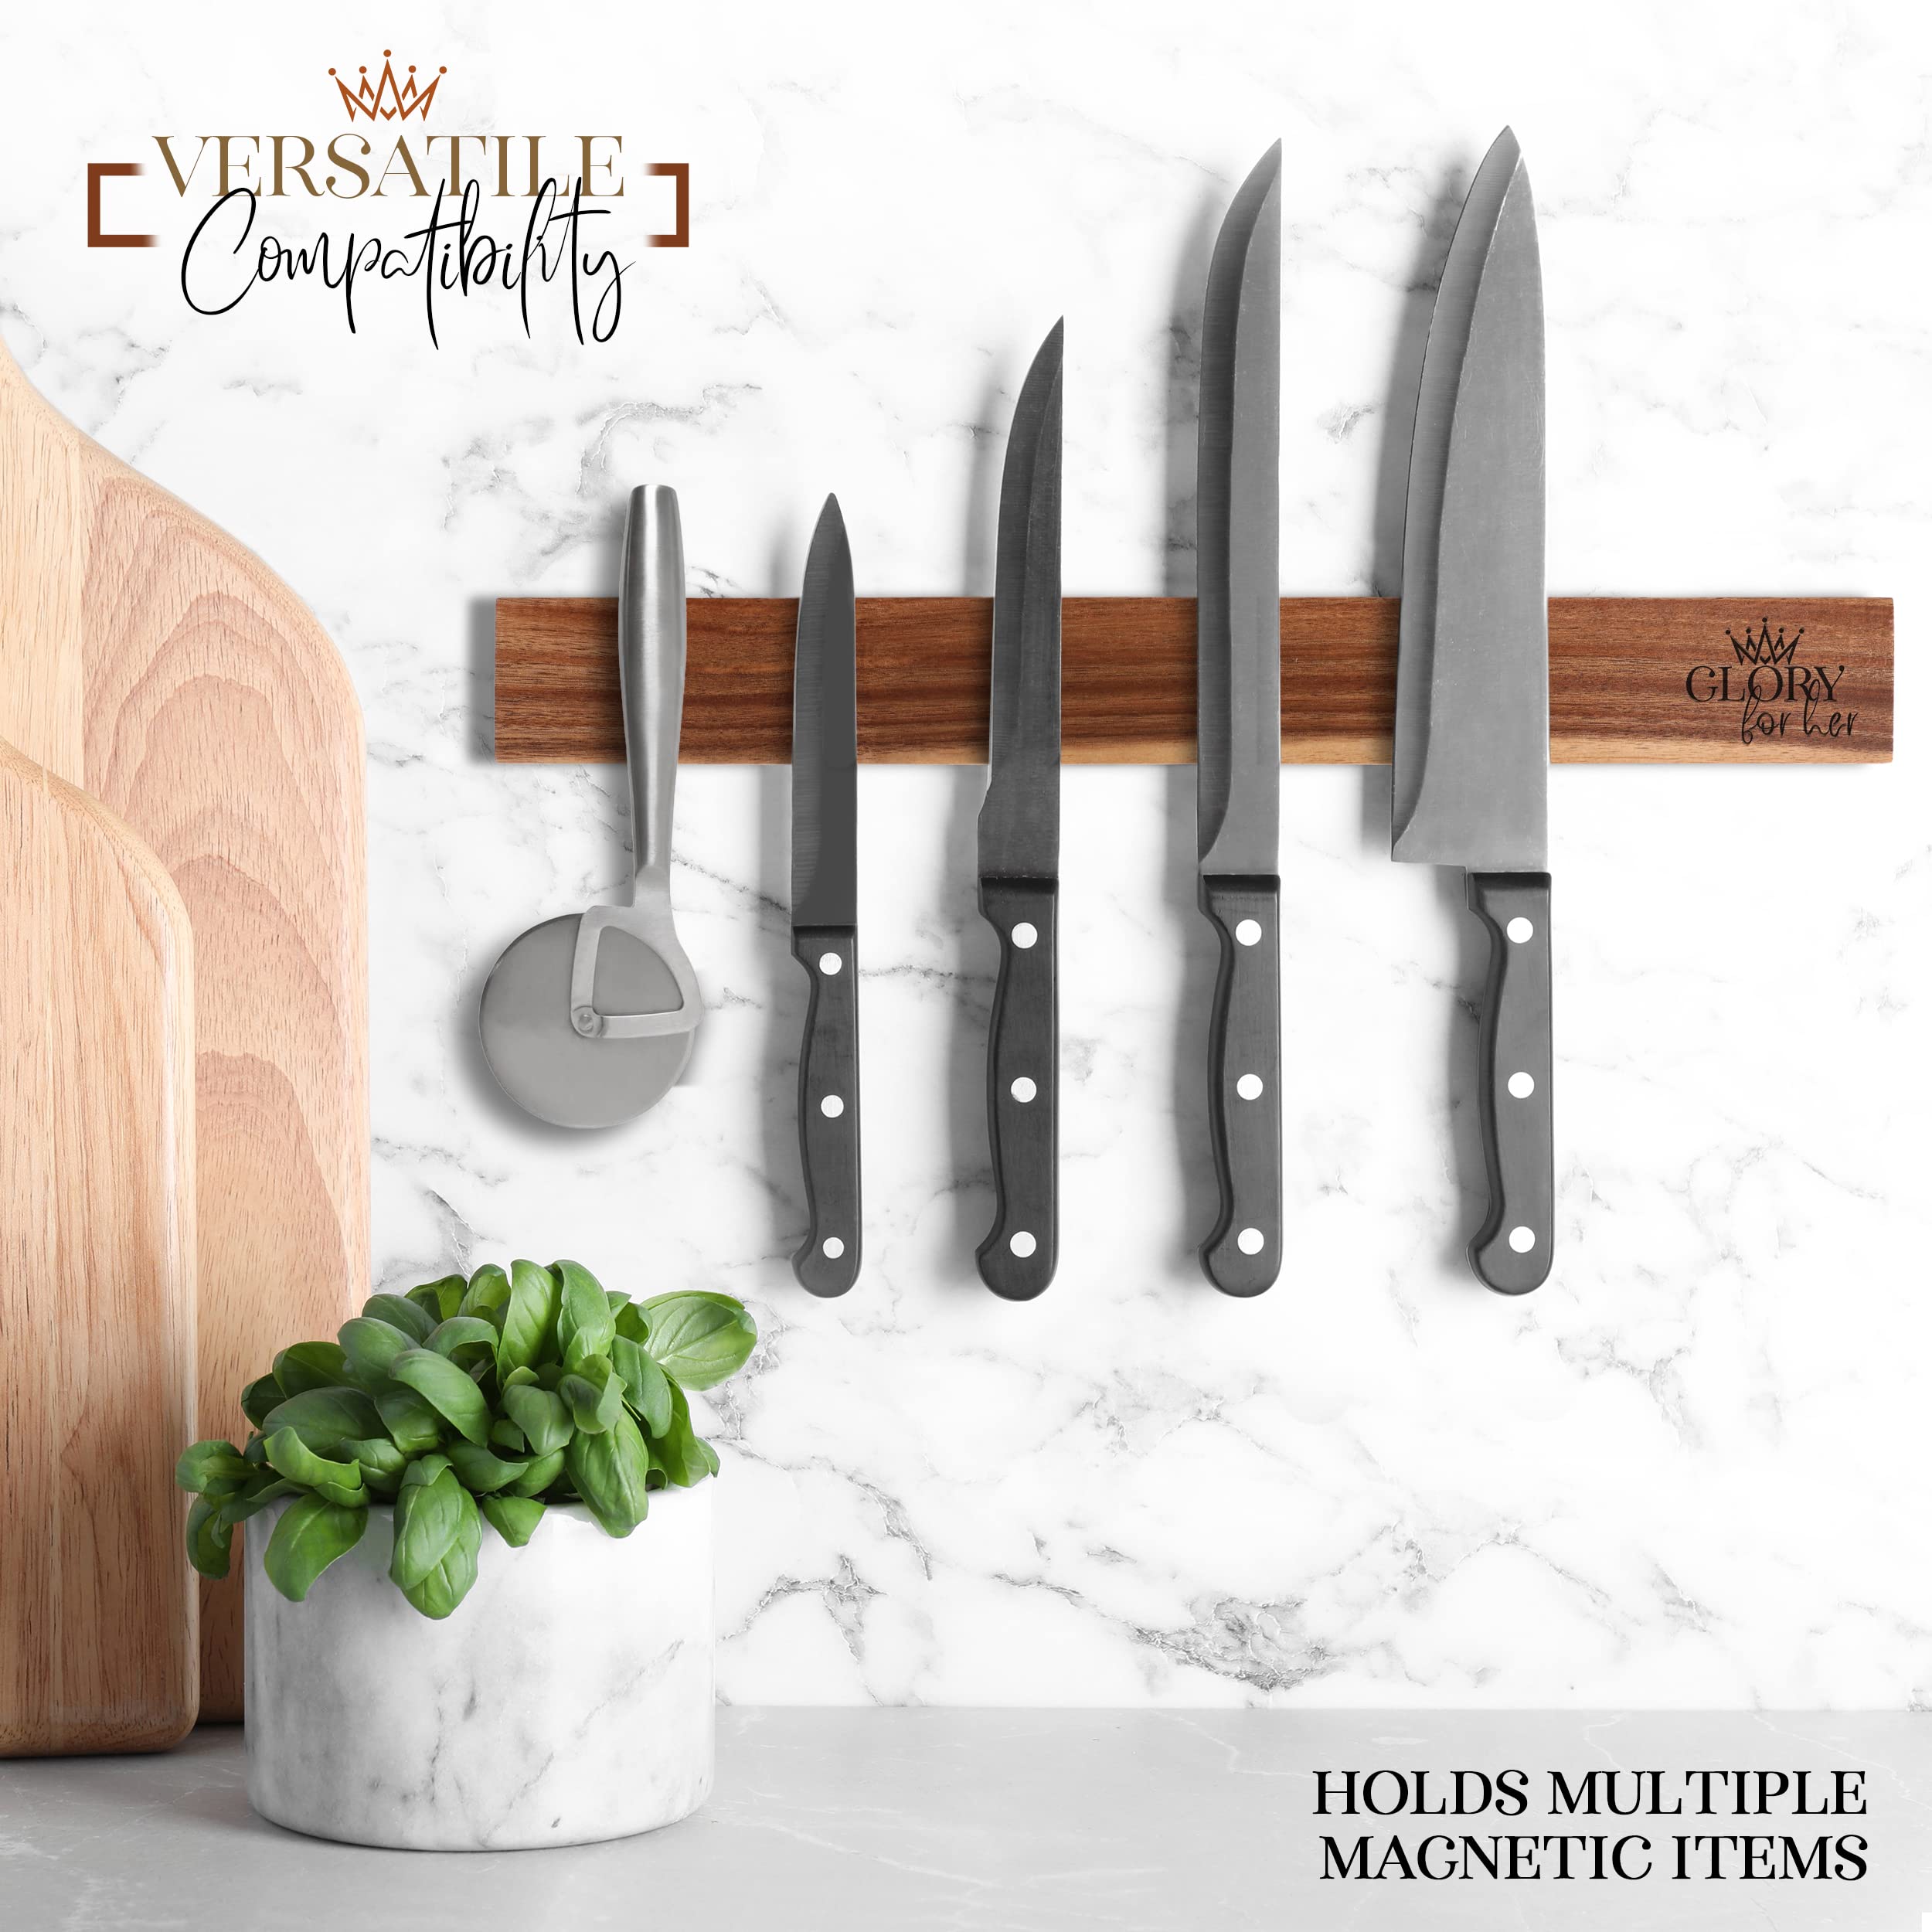 Magnetic Knife Holder for Wall - Wooden Magnetic Knife Holder - 15.7 Inch Acacia Wood Knife Holder - Kitchen Magnetic Knife Strip - Strong Magnetic Knife Bar - Space-saving Knife Rack